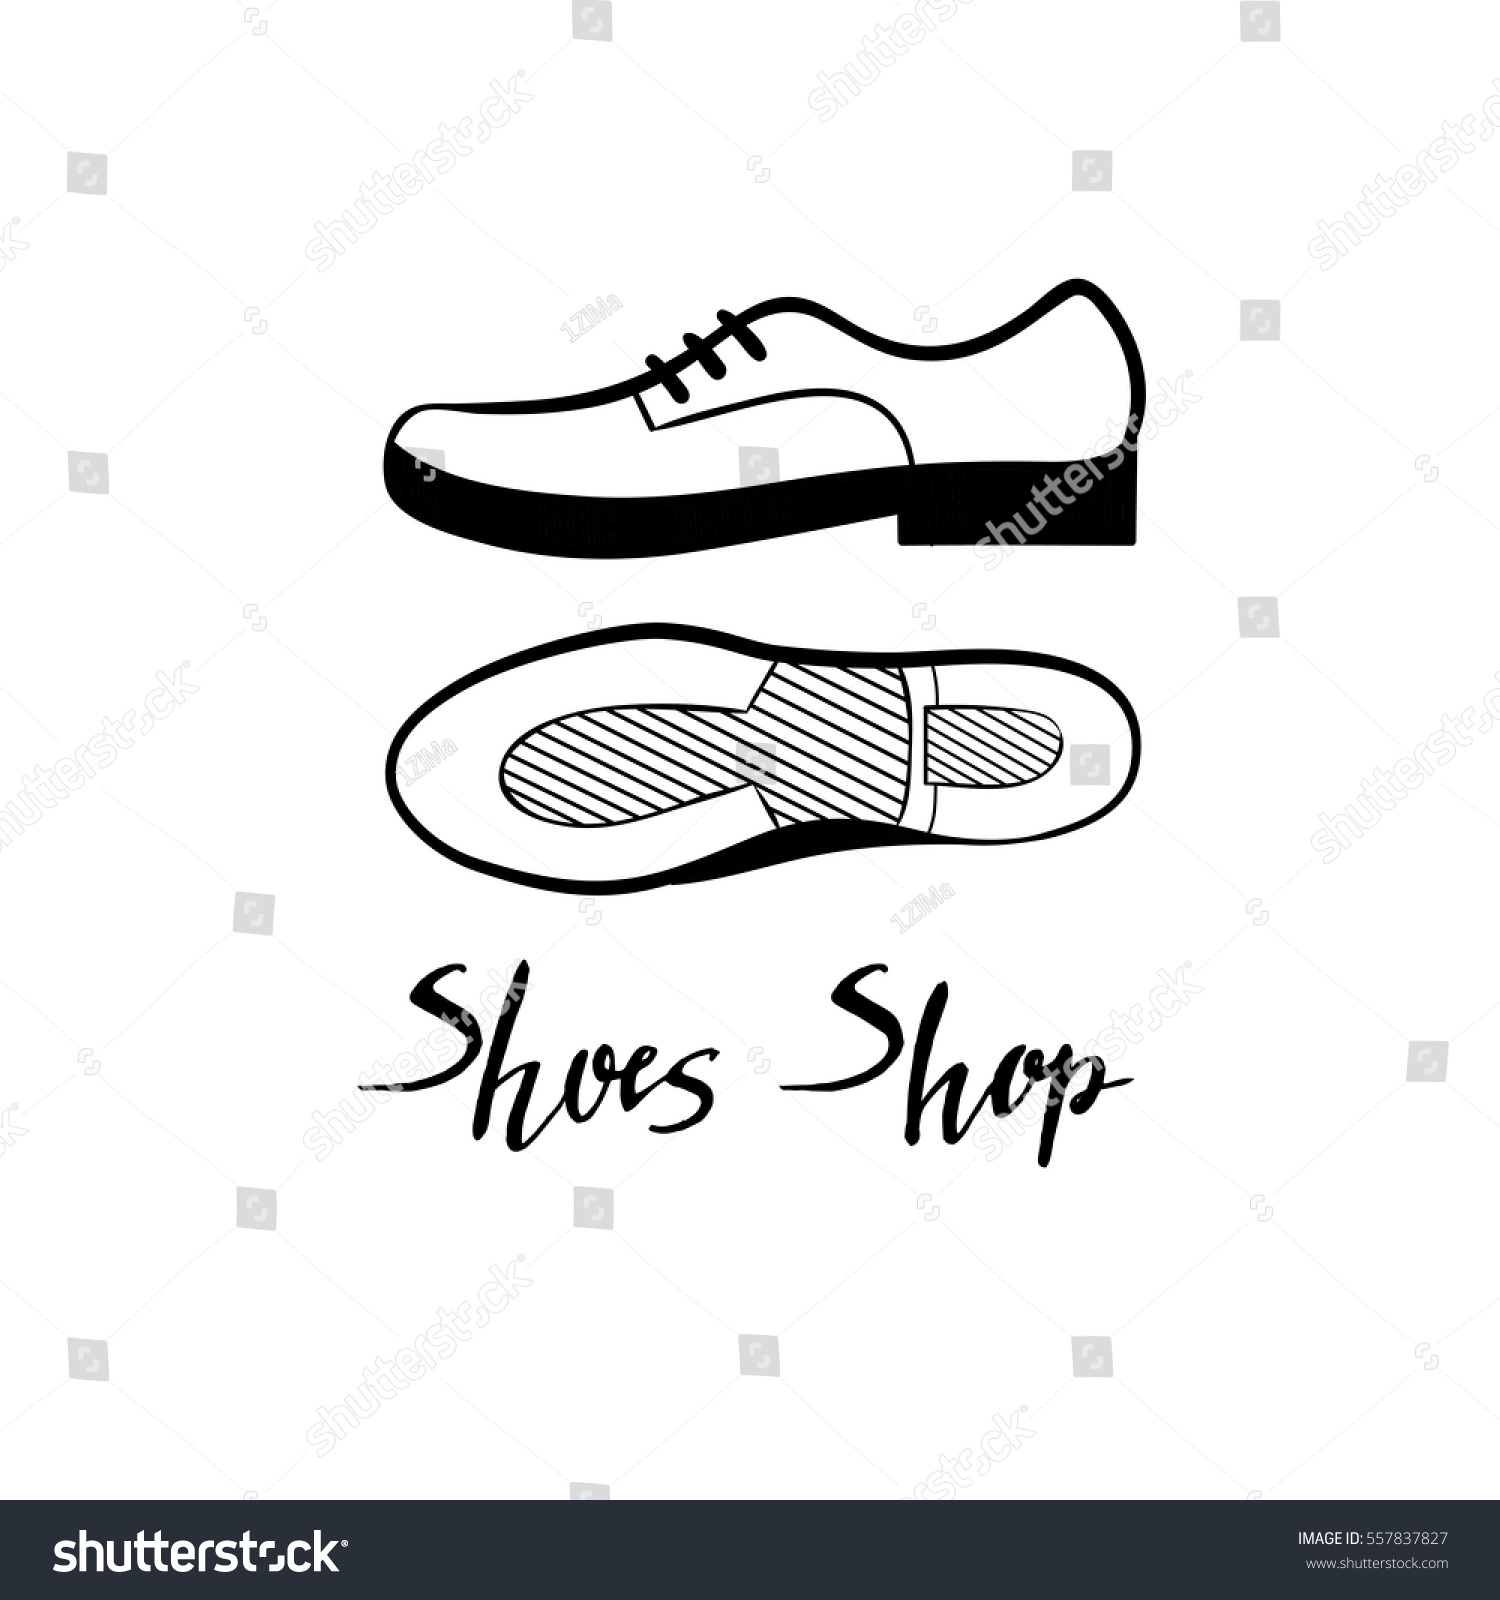 Shoes Shop Hand Drawn Men Shoes Stock Vector (Royalty Free) 557837827